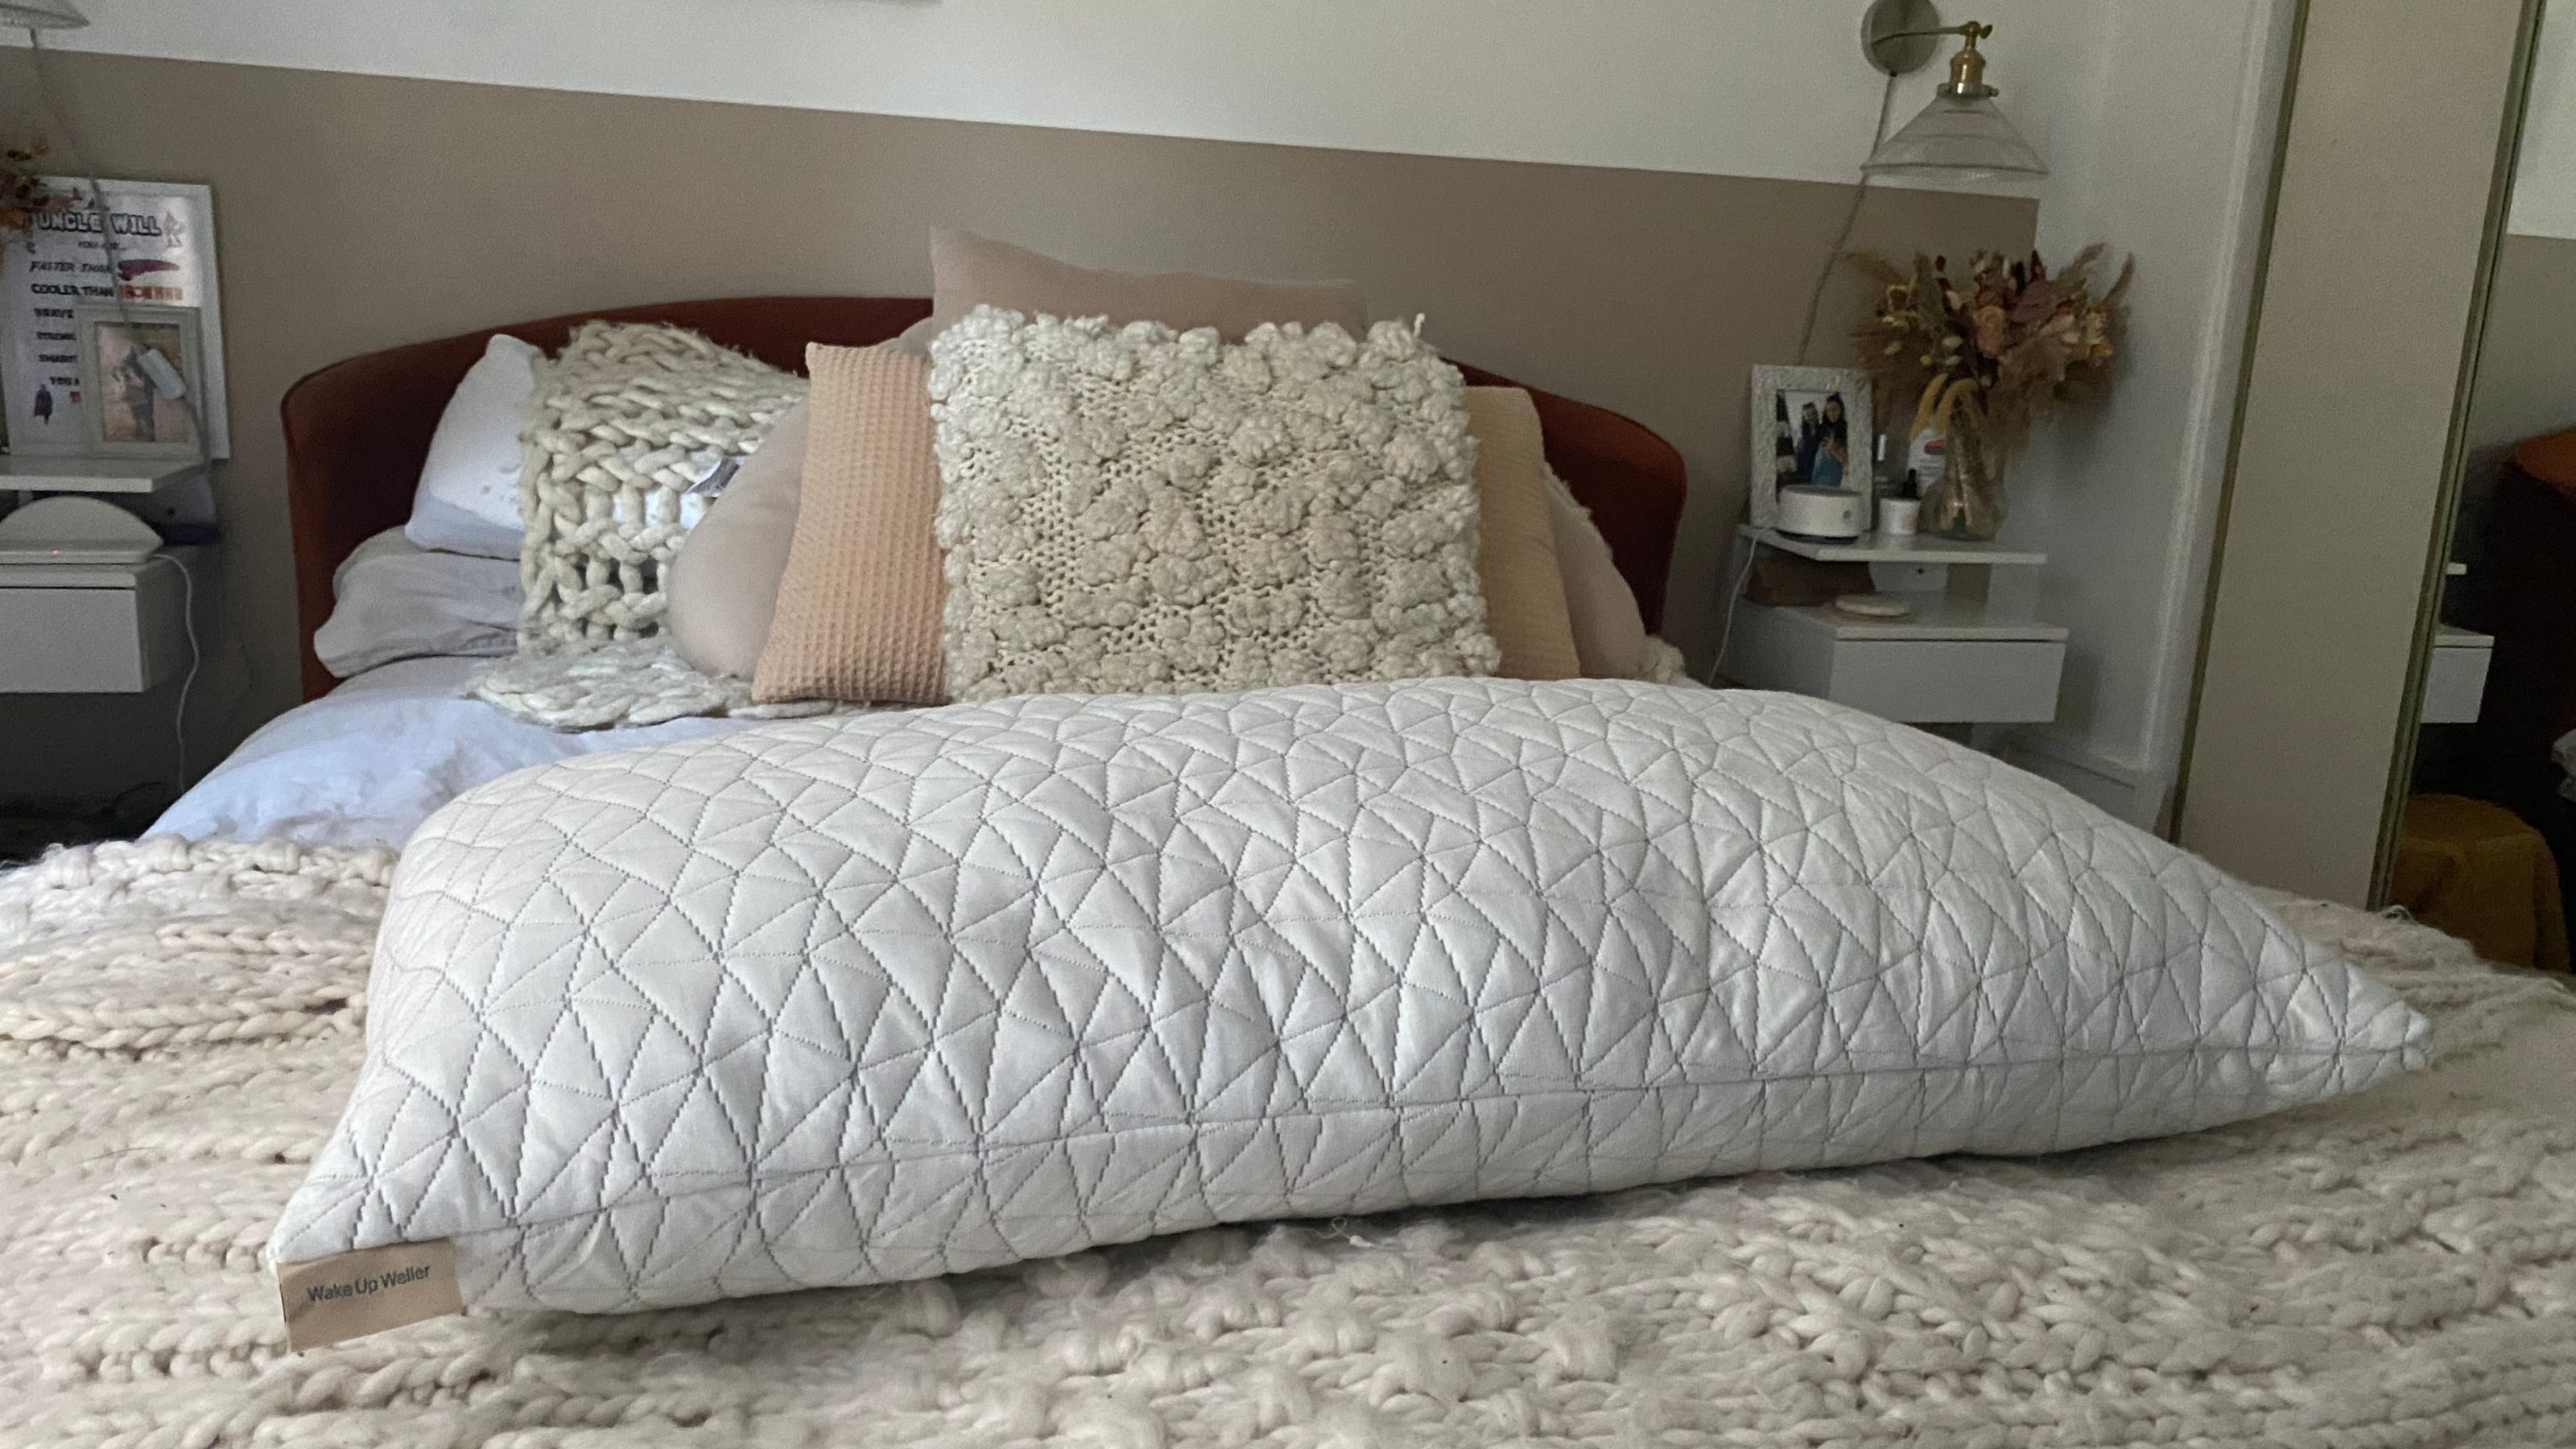 Coop Pillow Review: Why an Editor Loves This Adjustable Pillow